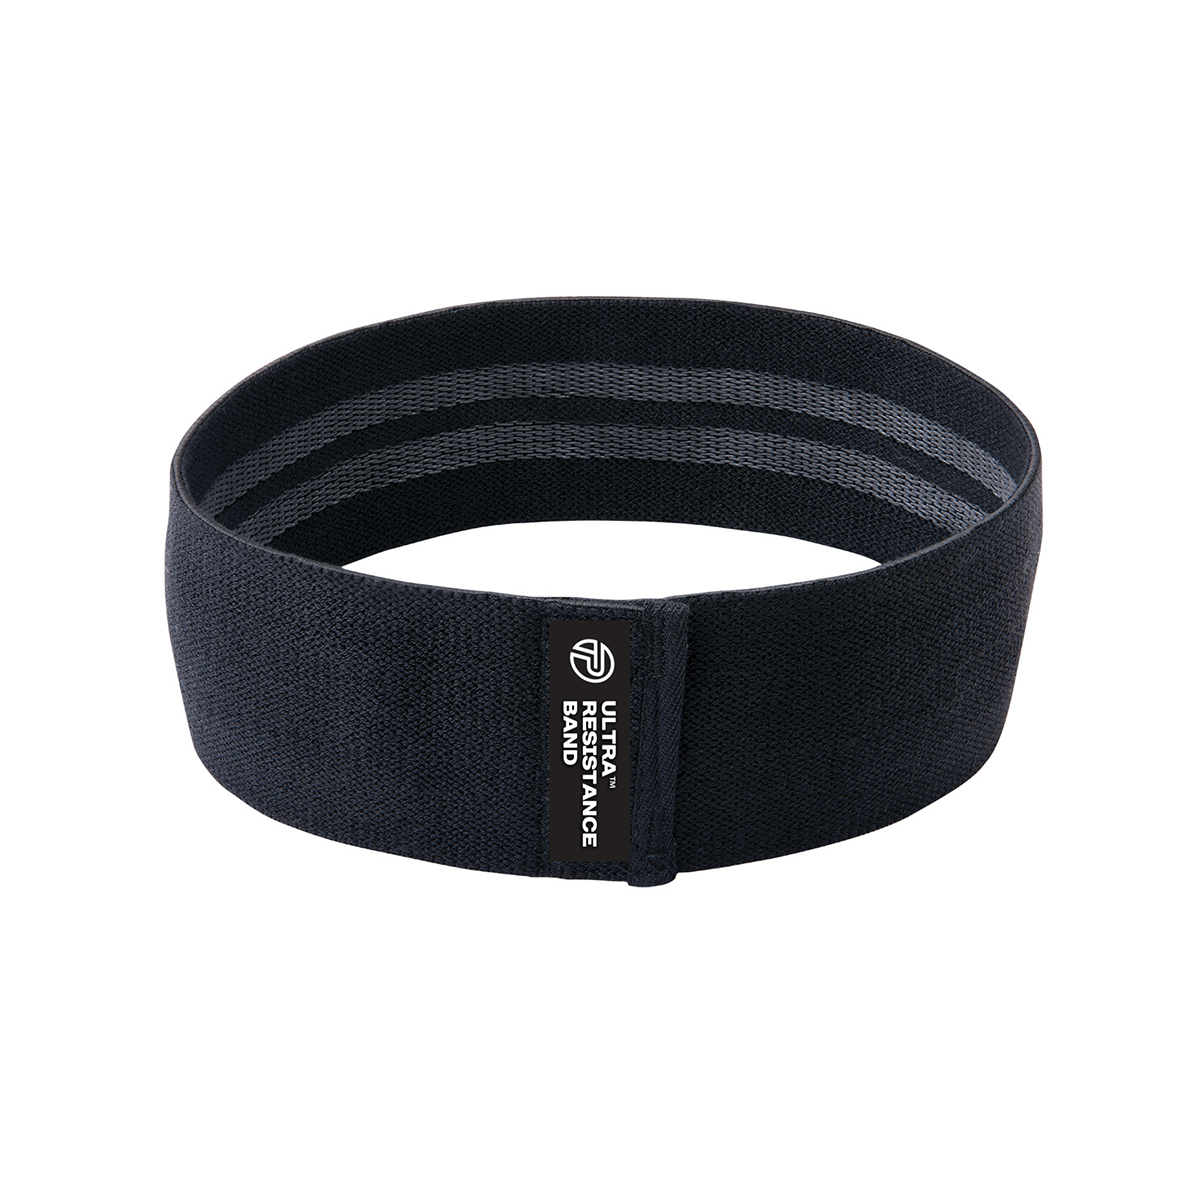 Pro-Tec Ultra Resistance Band, , large image number null